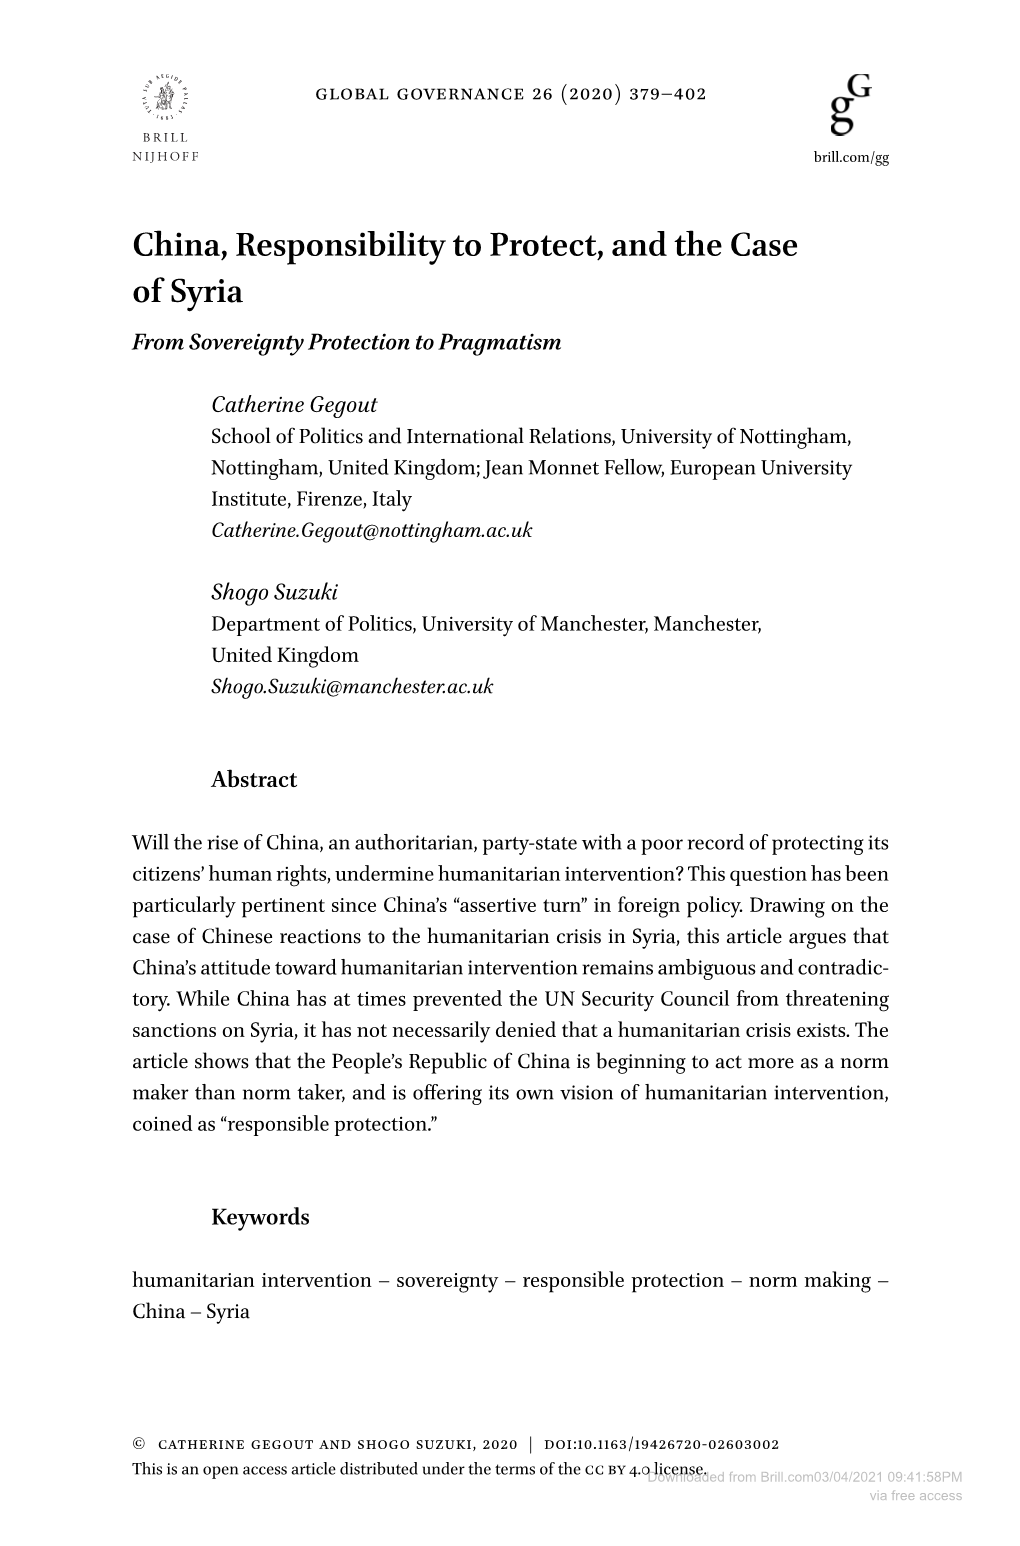 China, Responsibility to Protect, and the Case of Syria from Sovereignty Protection to Pragmatism